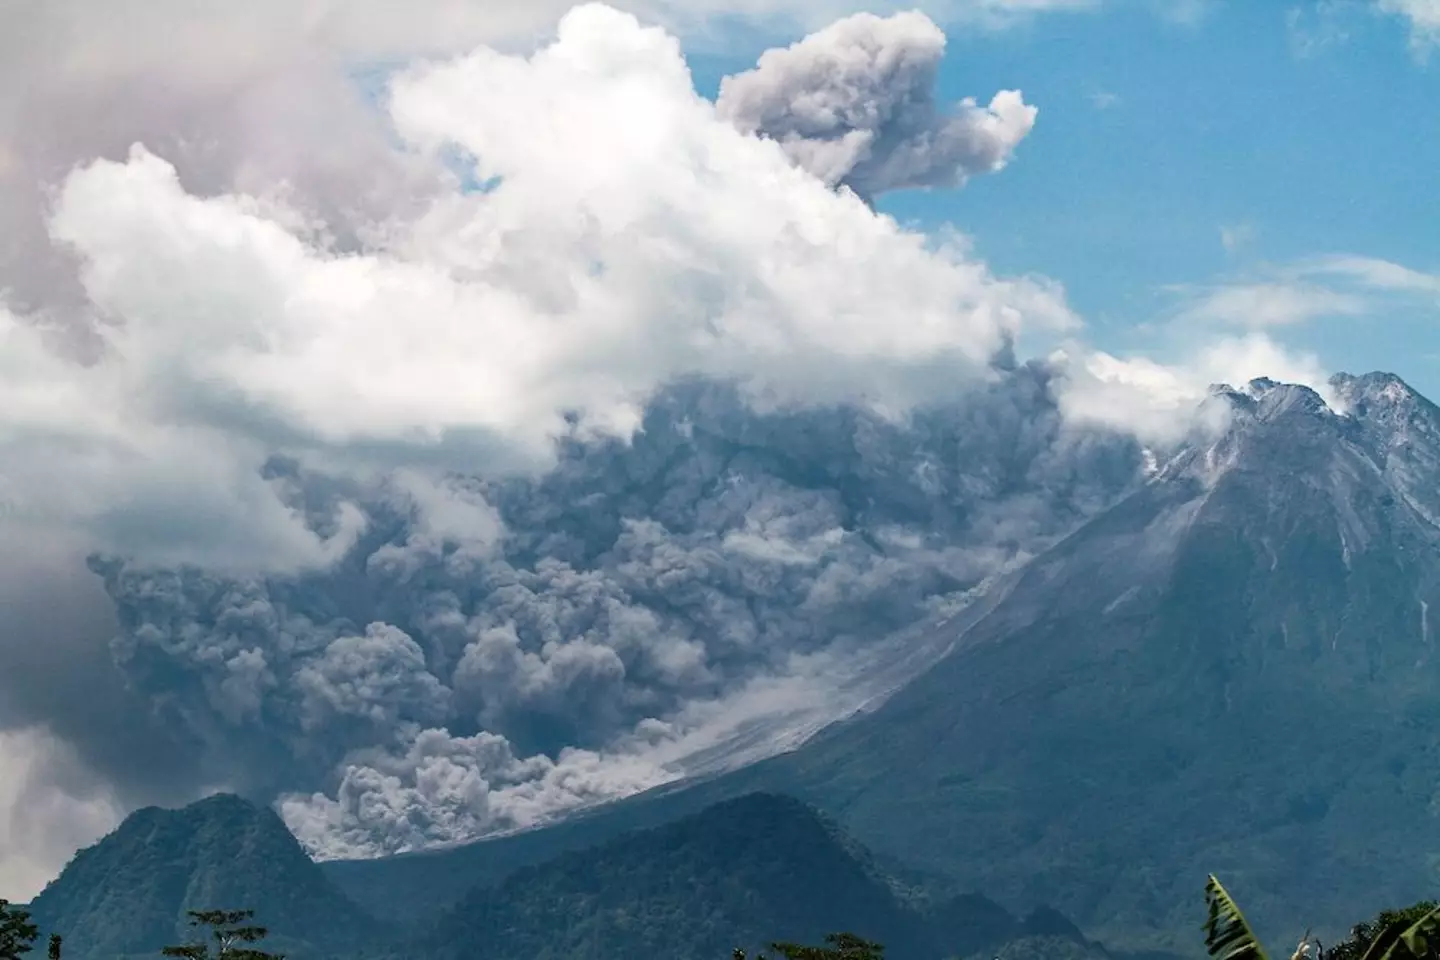 Mount Merapi is the most active volcano in Indonesia.